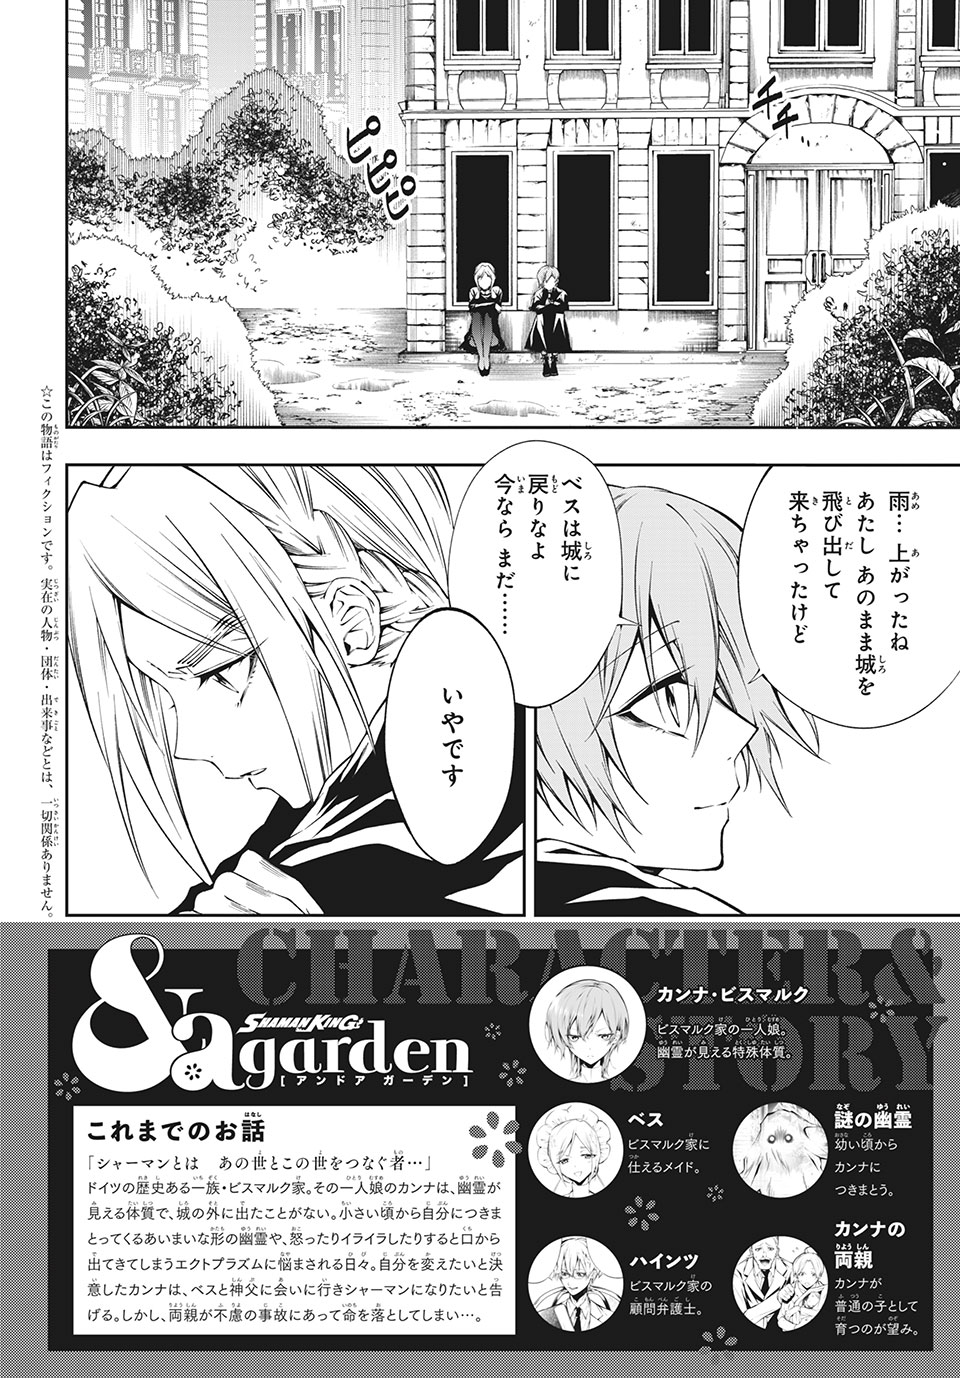 Shaman King: and a garden 第4.1話 - Page 2